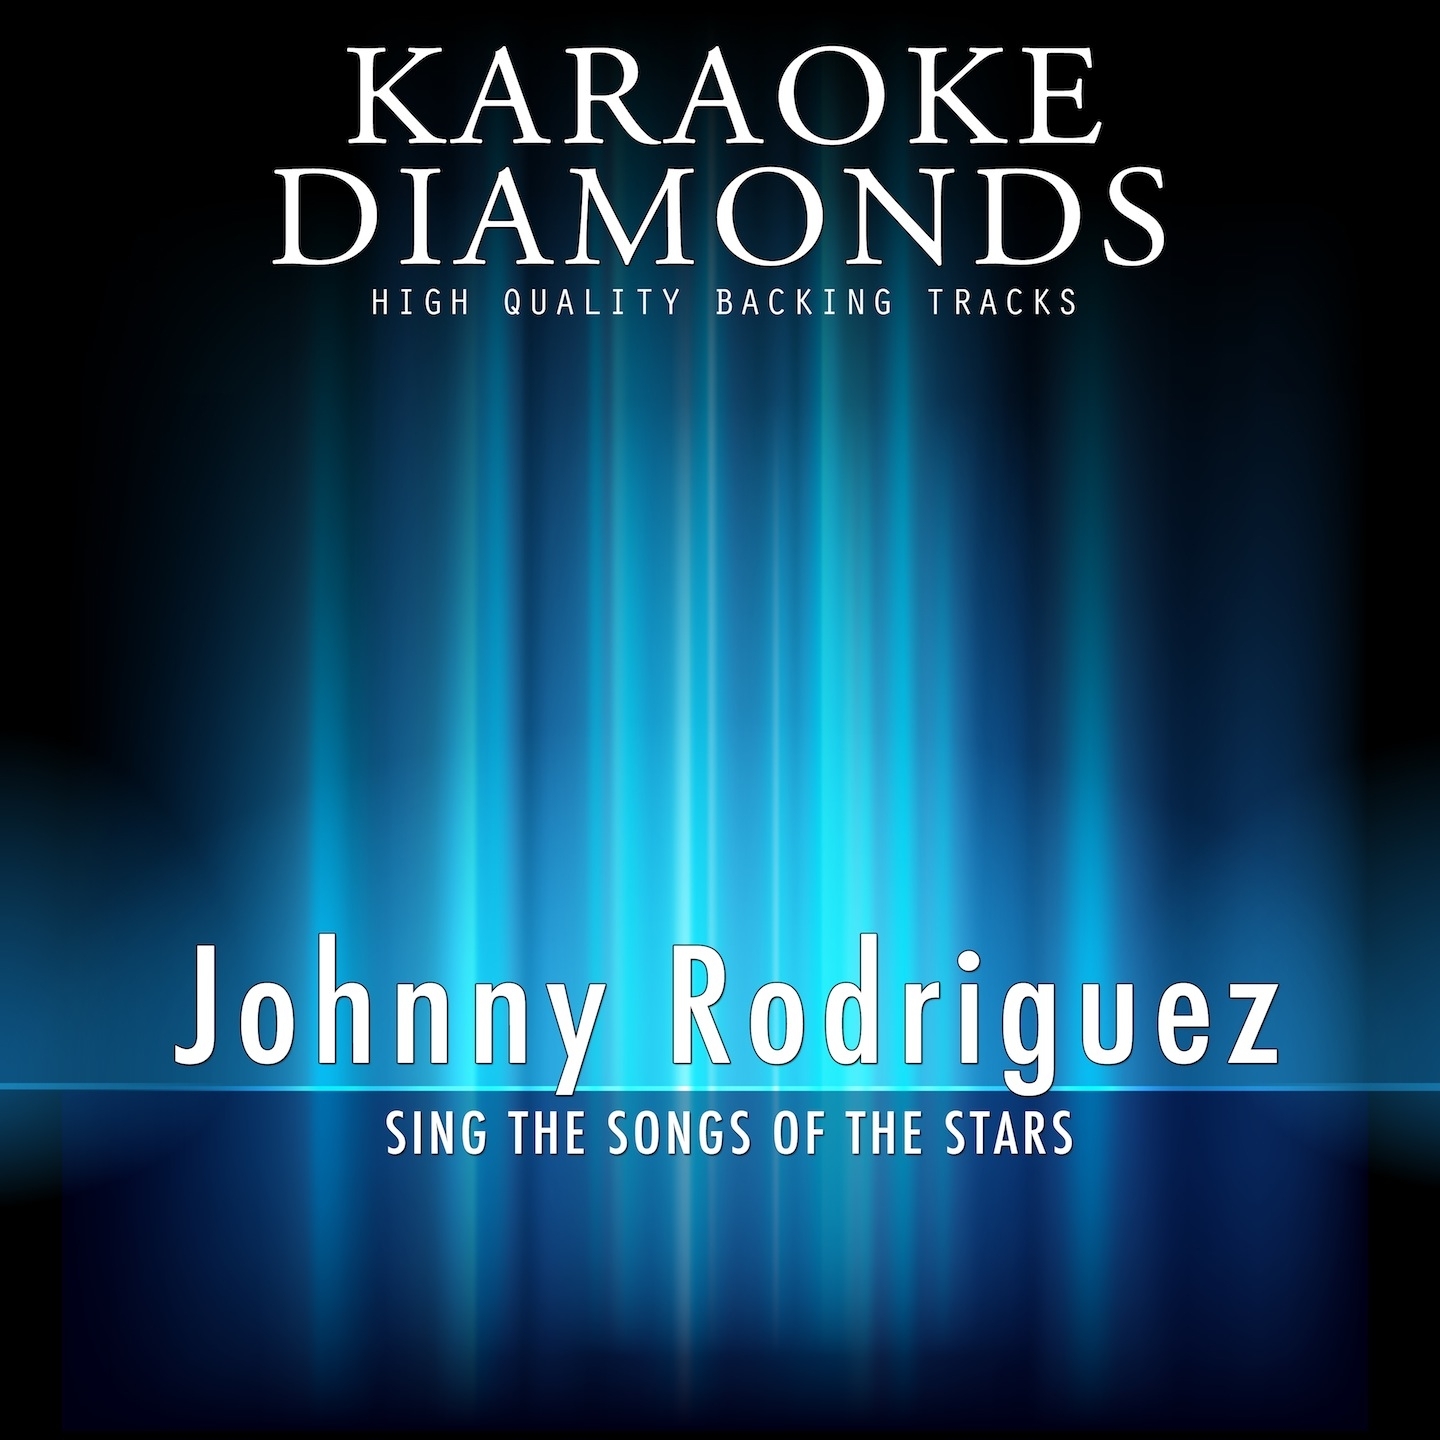 That's the Way Love Goes (Karaoke Version In the Style of Johnny Rodriguez)